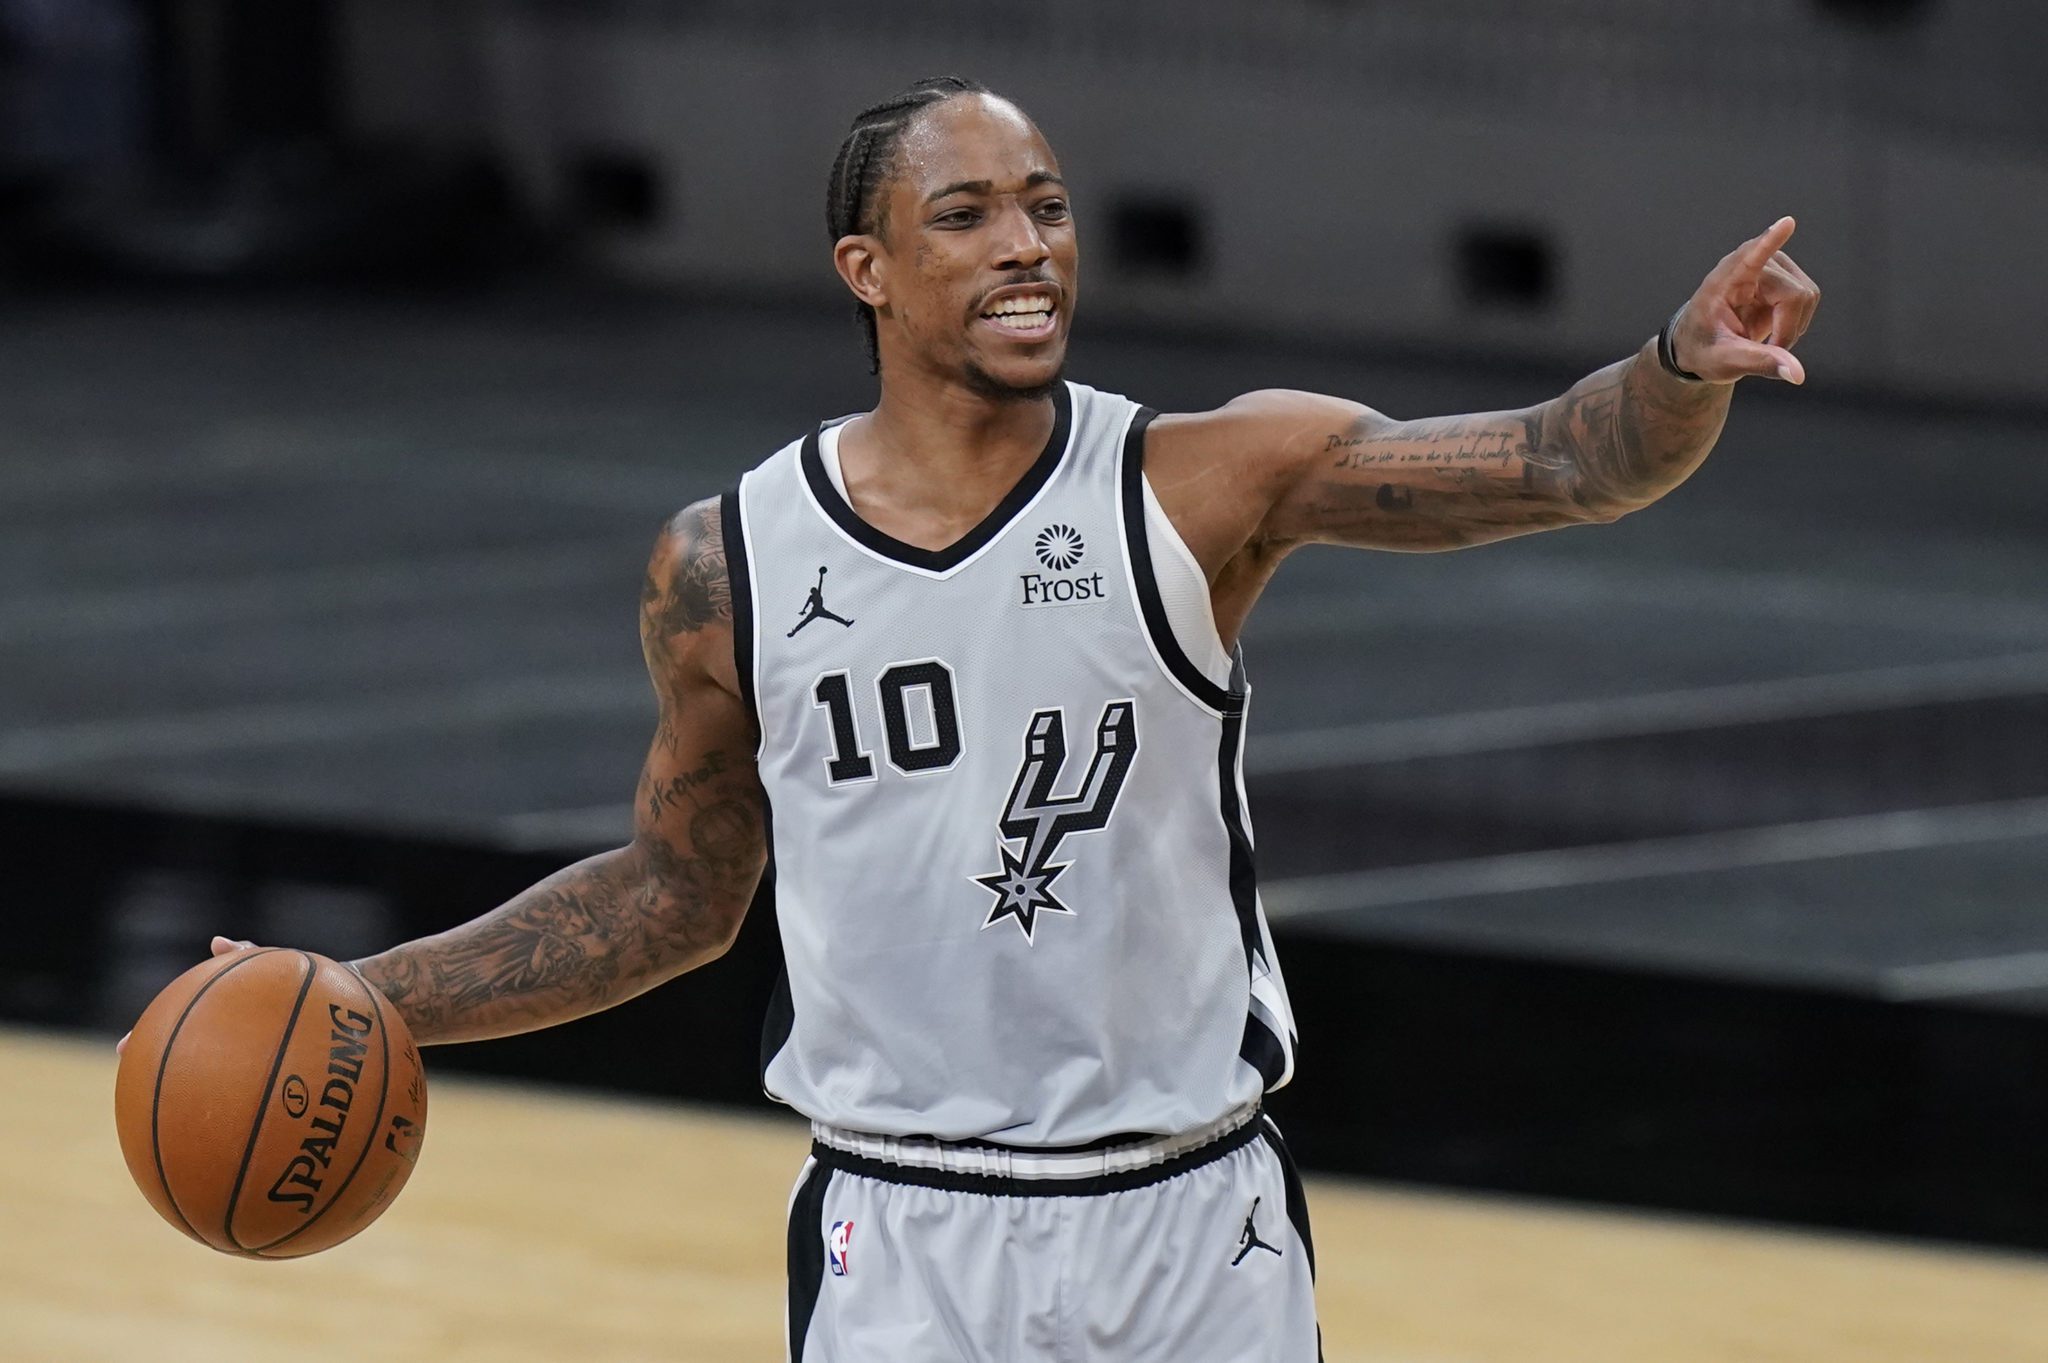 DeMar DeRozan Has Interest in Joining the Lakers, Per Report